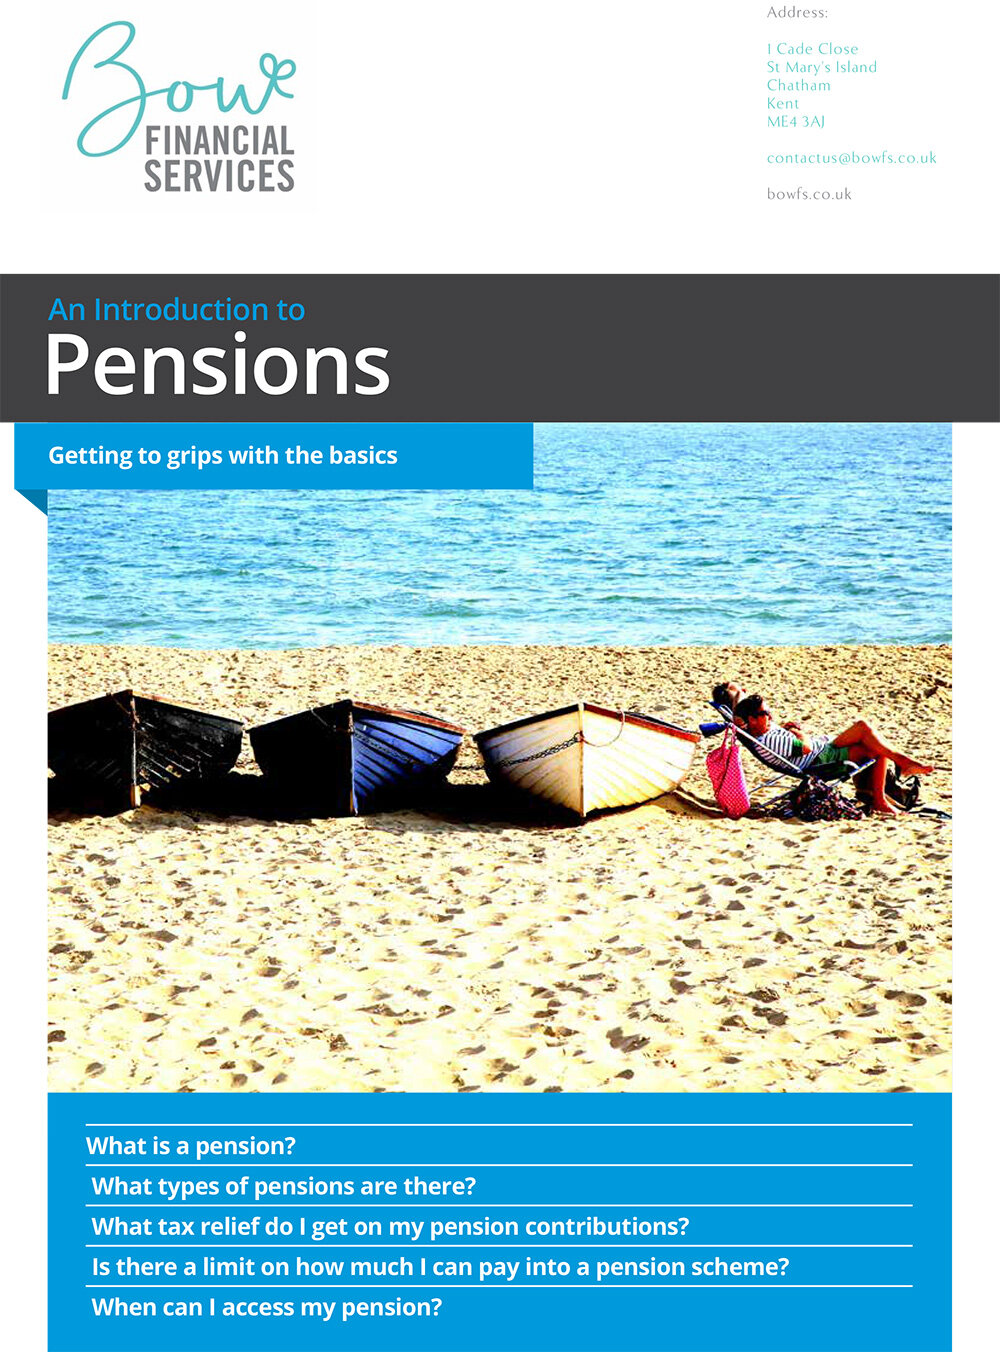 An-Introduction-to-Pensions---January-2020-2.jpg